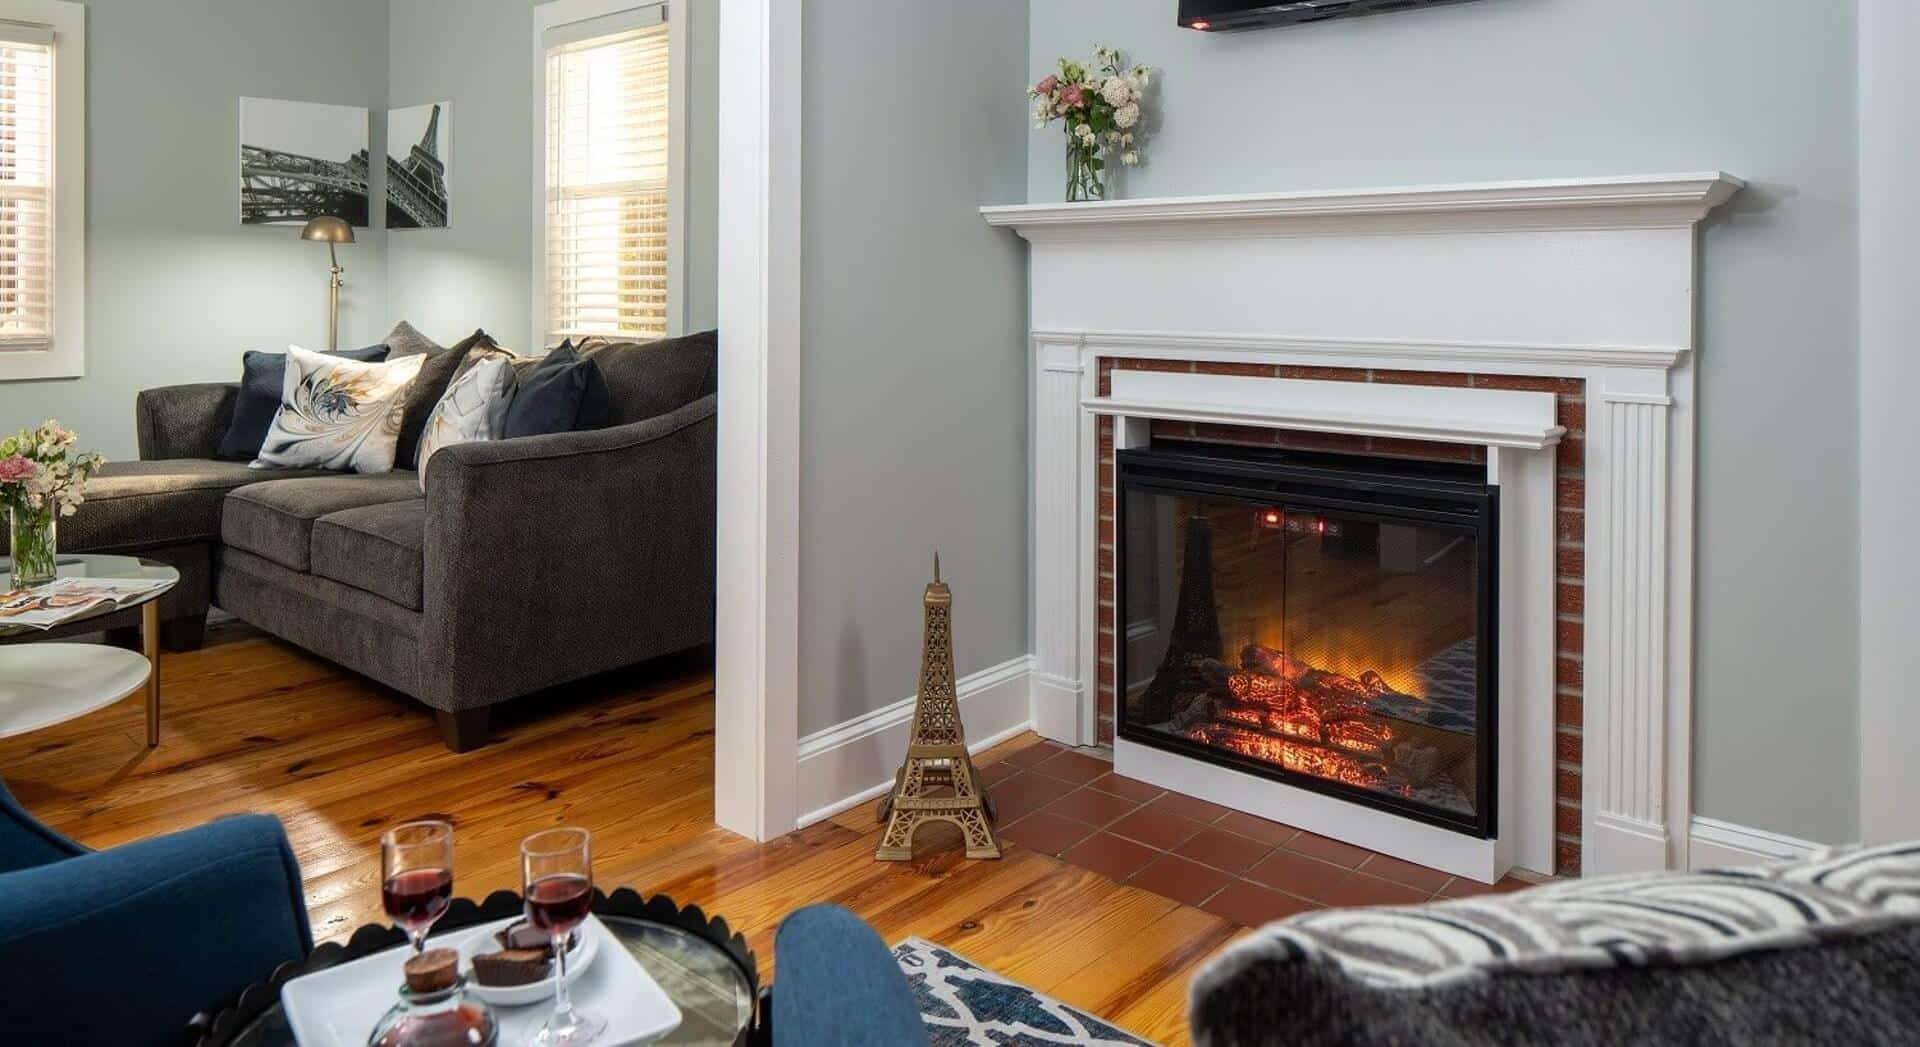 Sitting area of a bedroom with sectional couch, sitting chairs and gas fireplace with white mantel